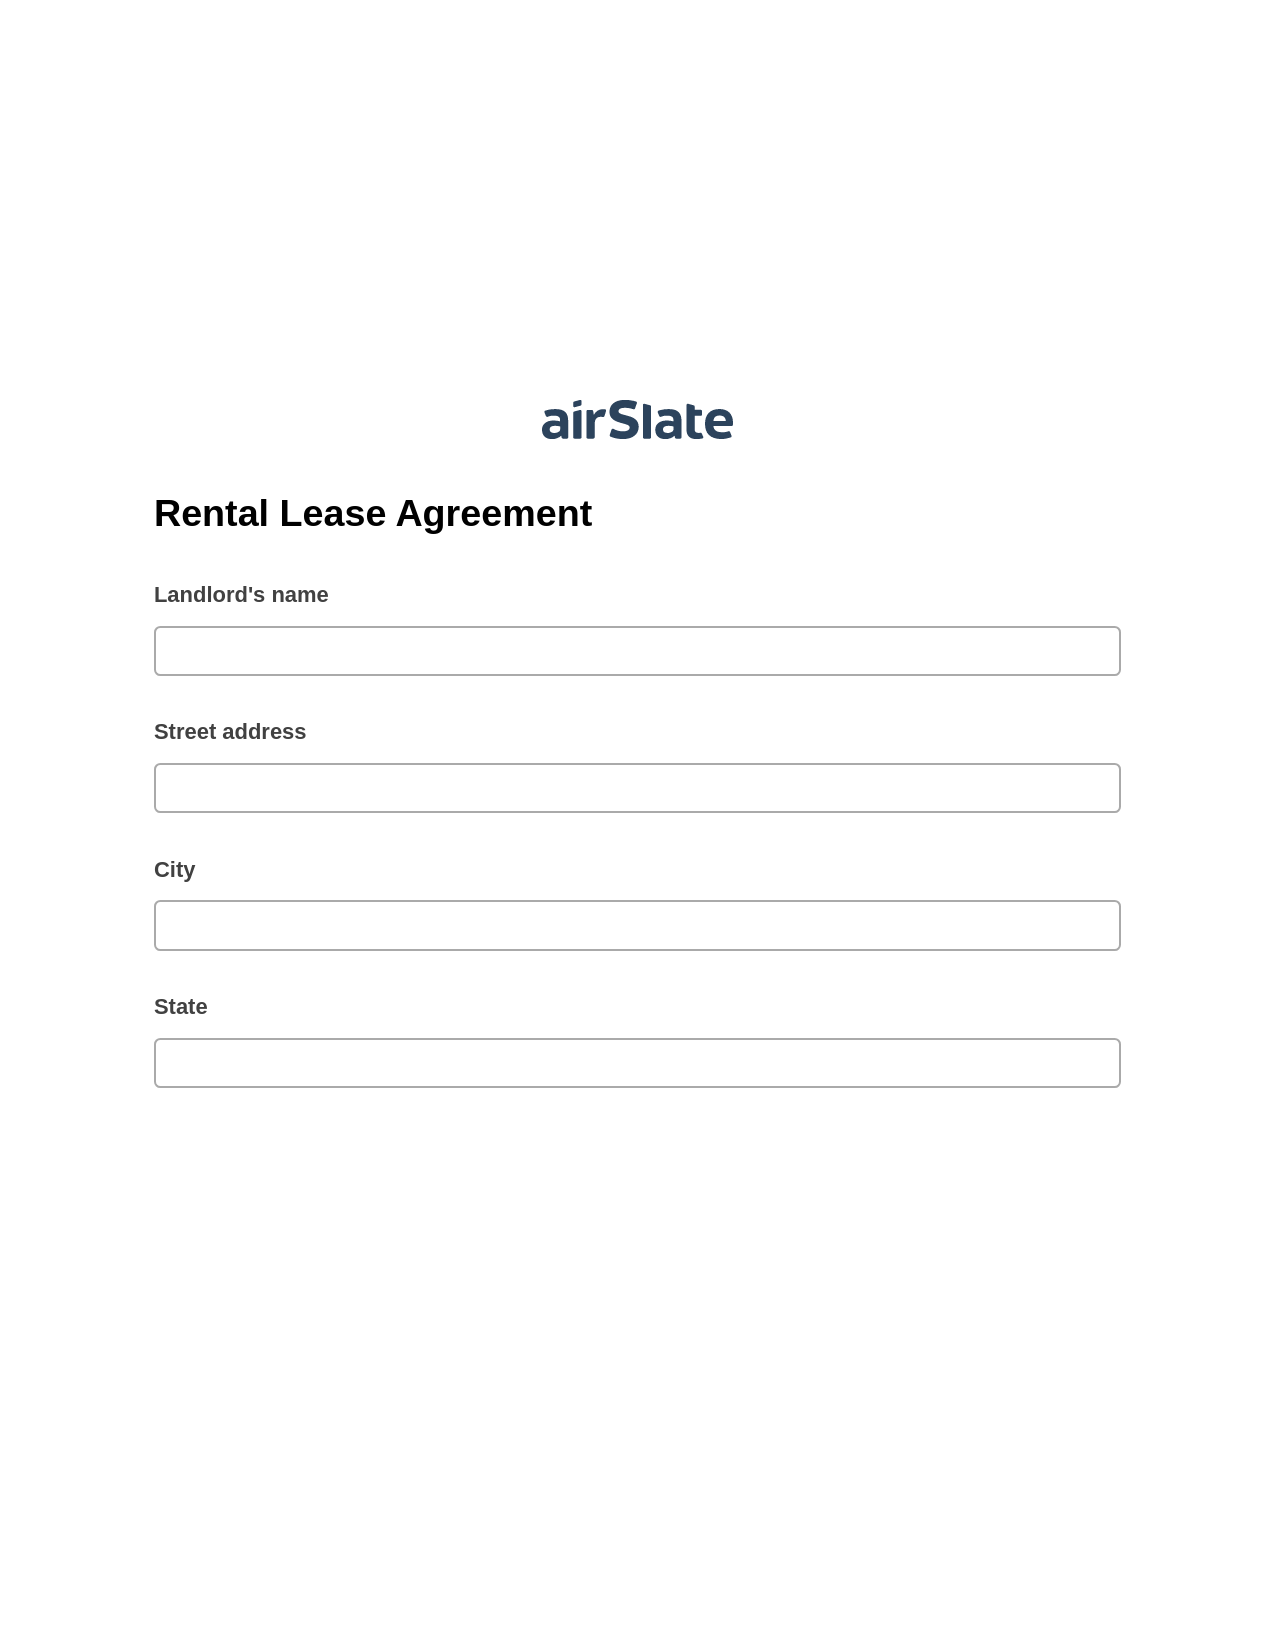 Rental Lease Agreement Pre-fill from MySQL Dropdown Options Bot, Create slate from another Flow Bot, Email Notification Postfinish Bot